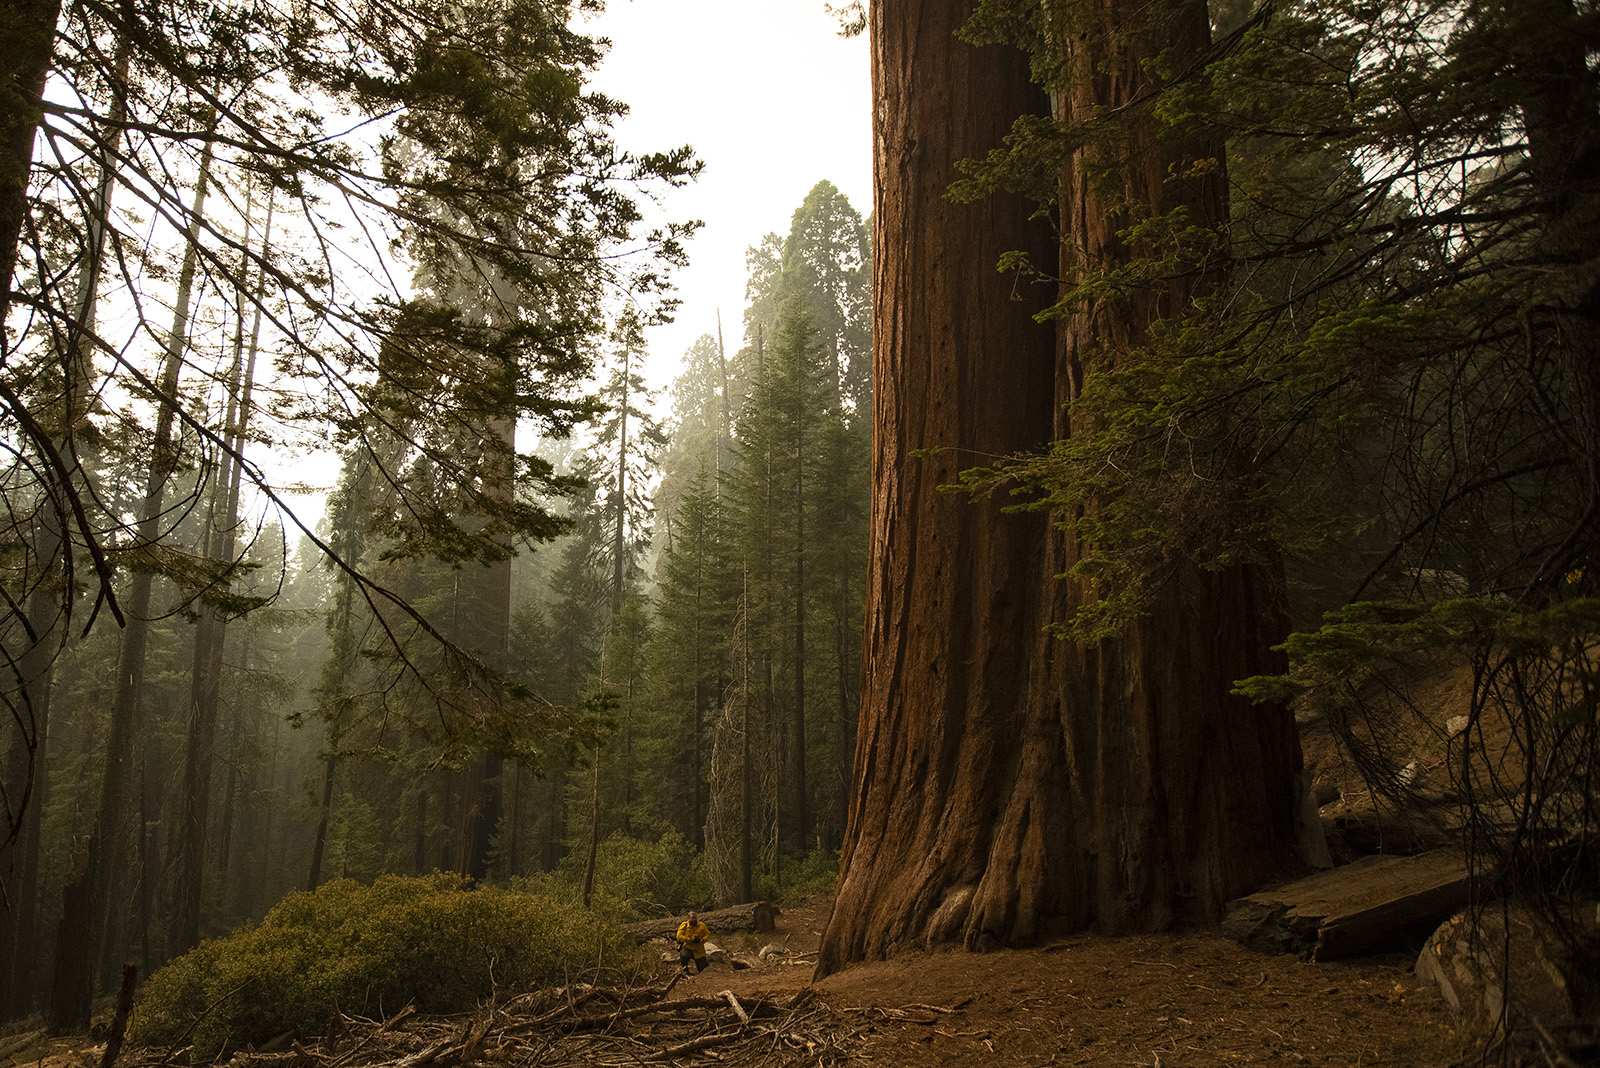 America’s four most polluted national parks are in California, study finds